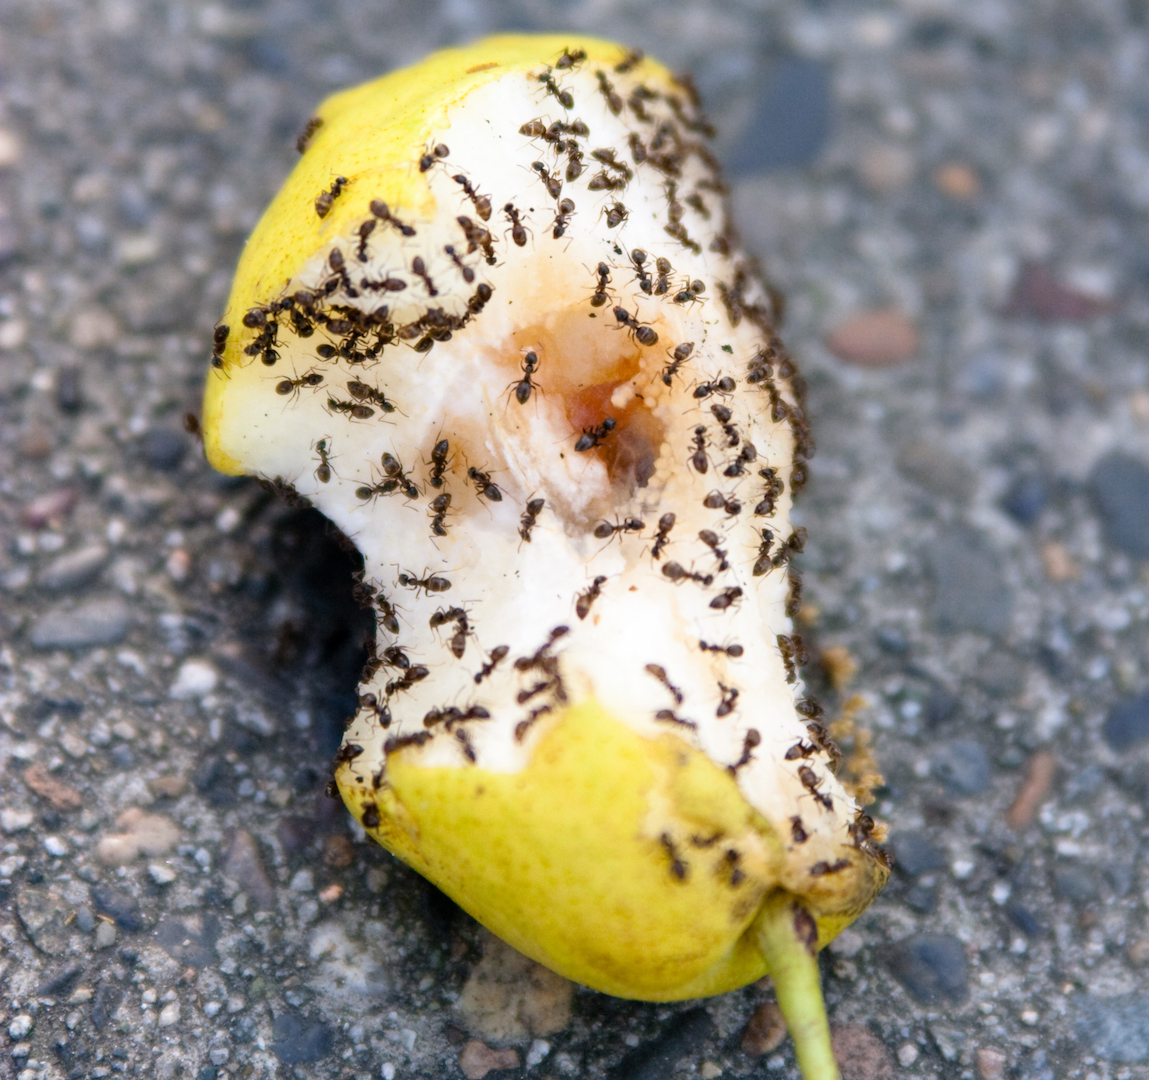 An apple being consumed by swarm of ants